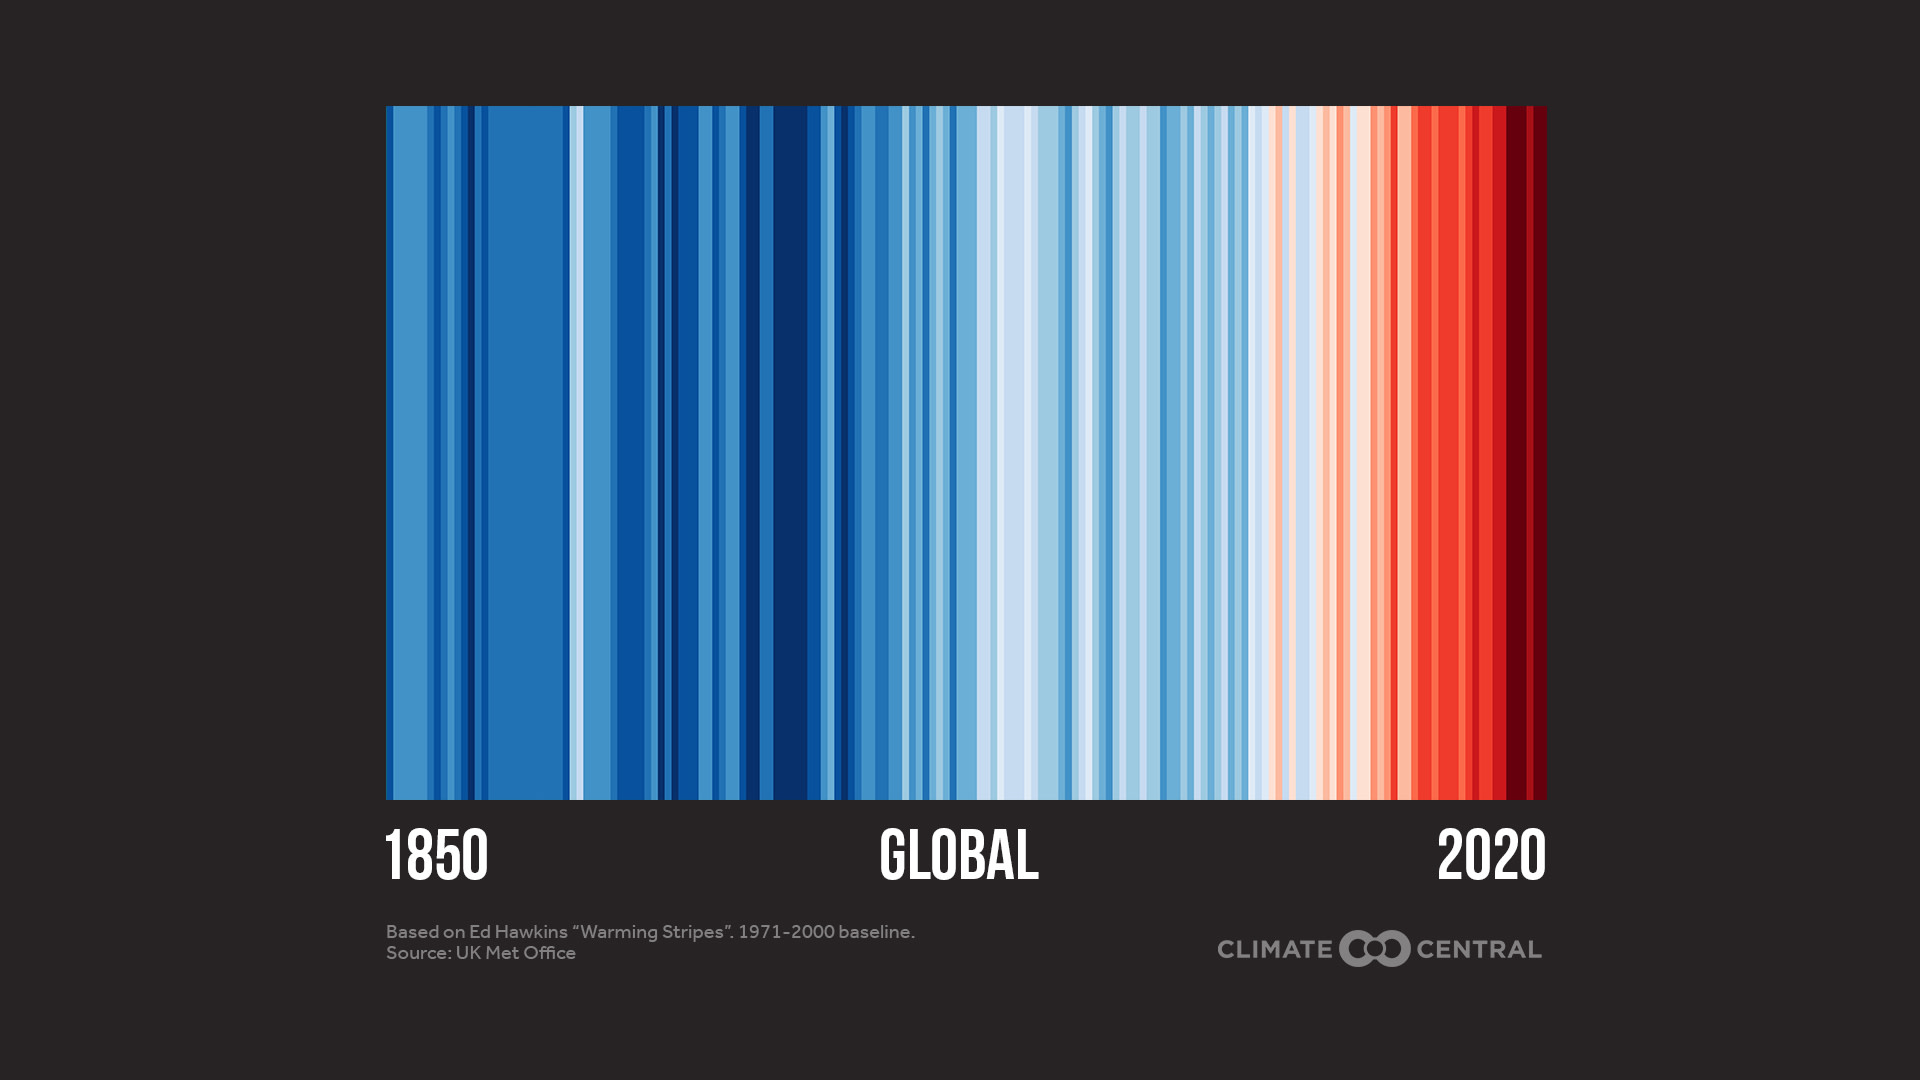 Global Warming Stripes - 2020 in Review: Global Temperature Rankings